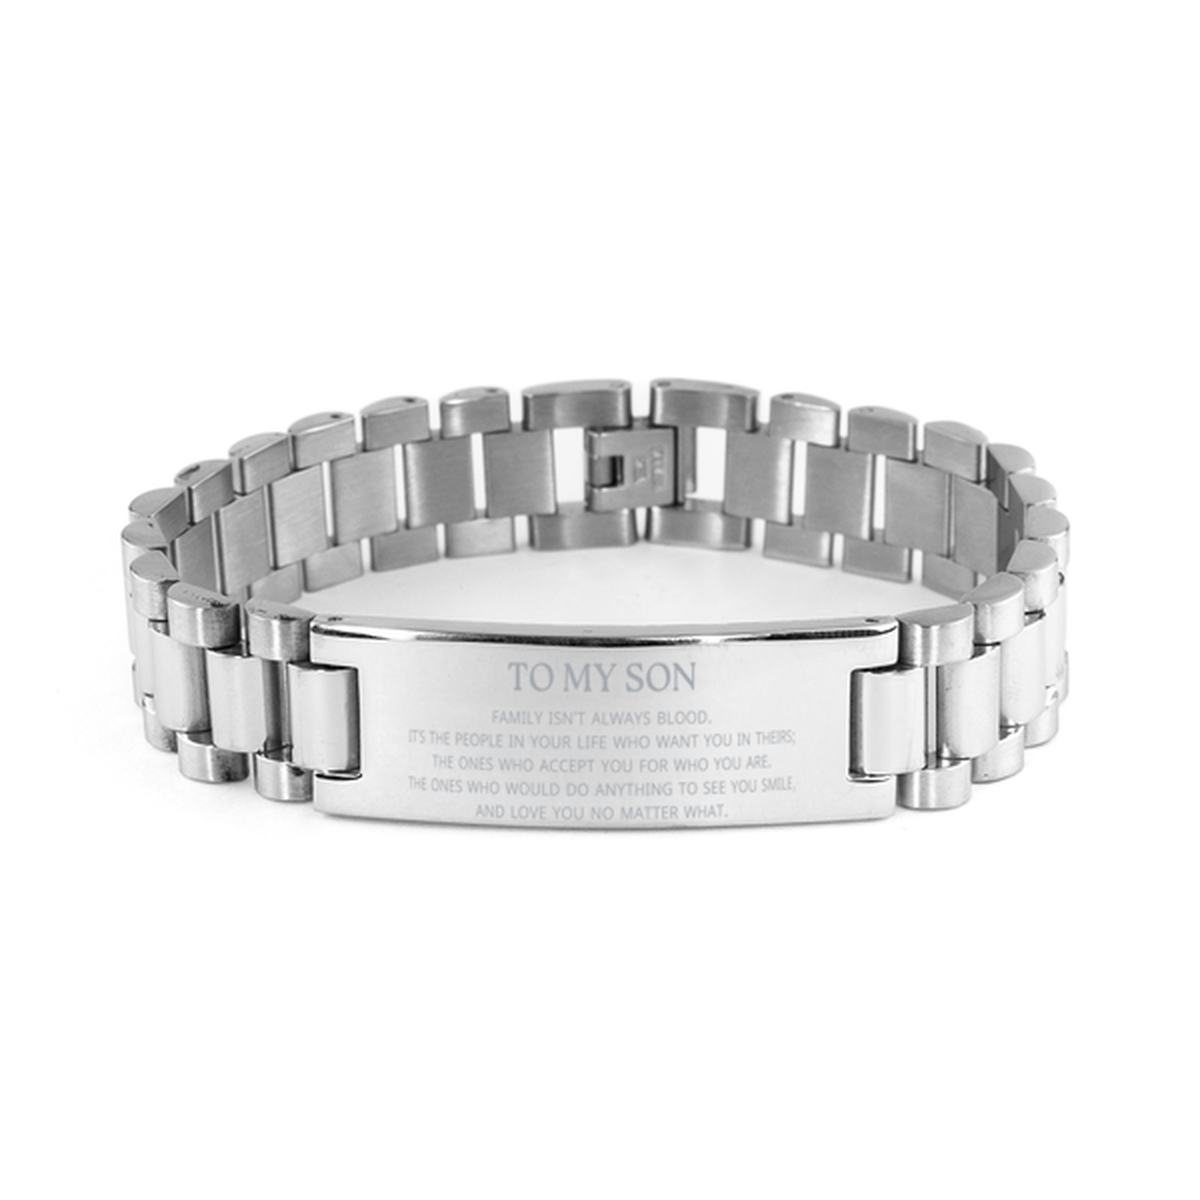 To My Son Gifts, Family isn't always blood, Son Ladder Stainless Steel Bracelet, Birthday Christmas Unique Present For Son